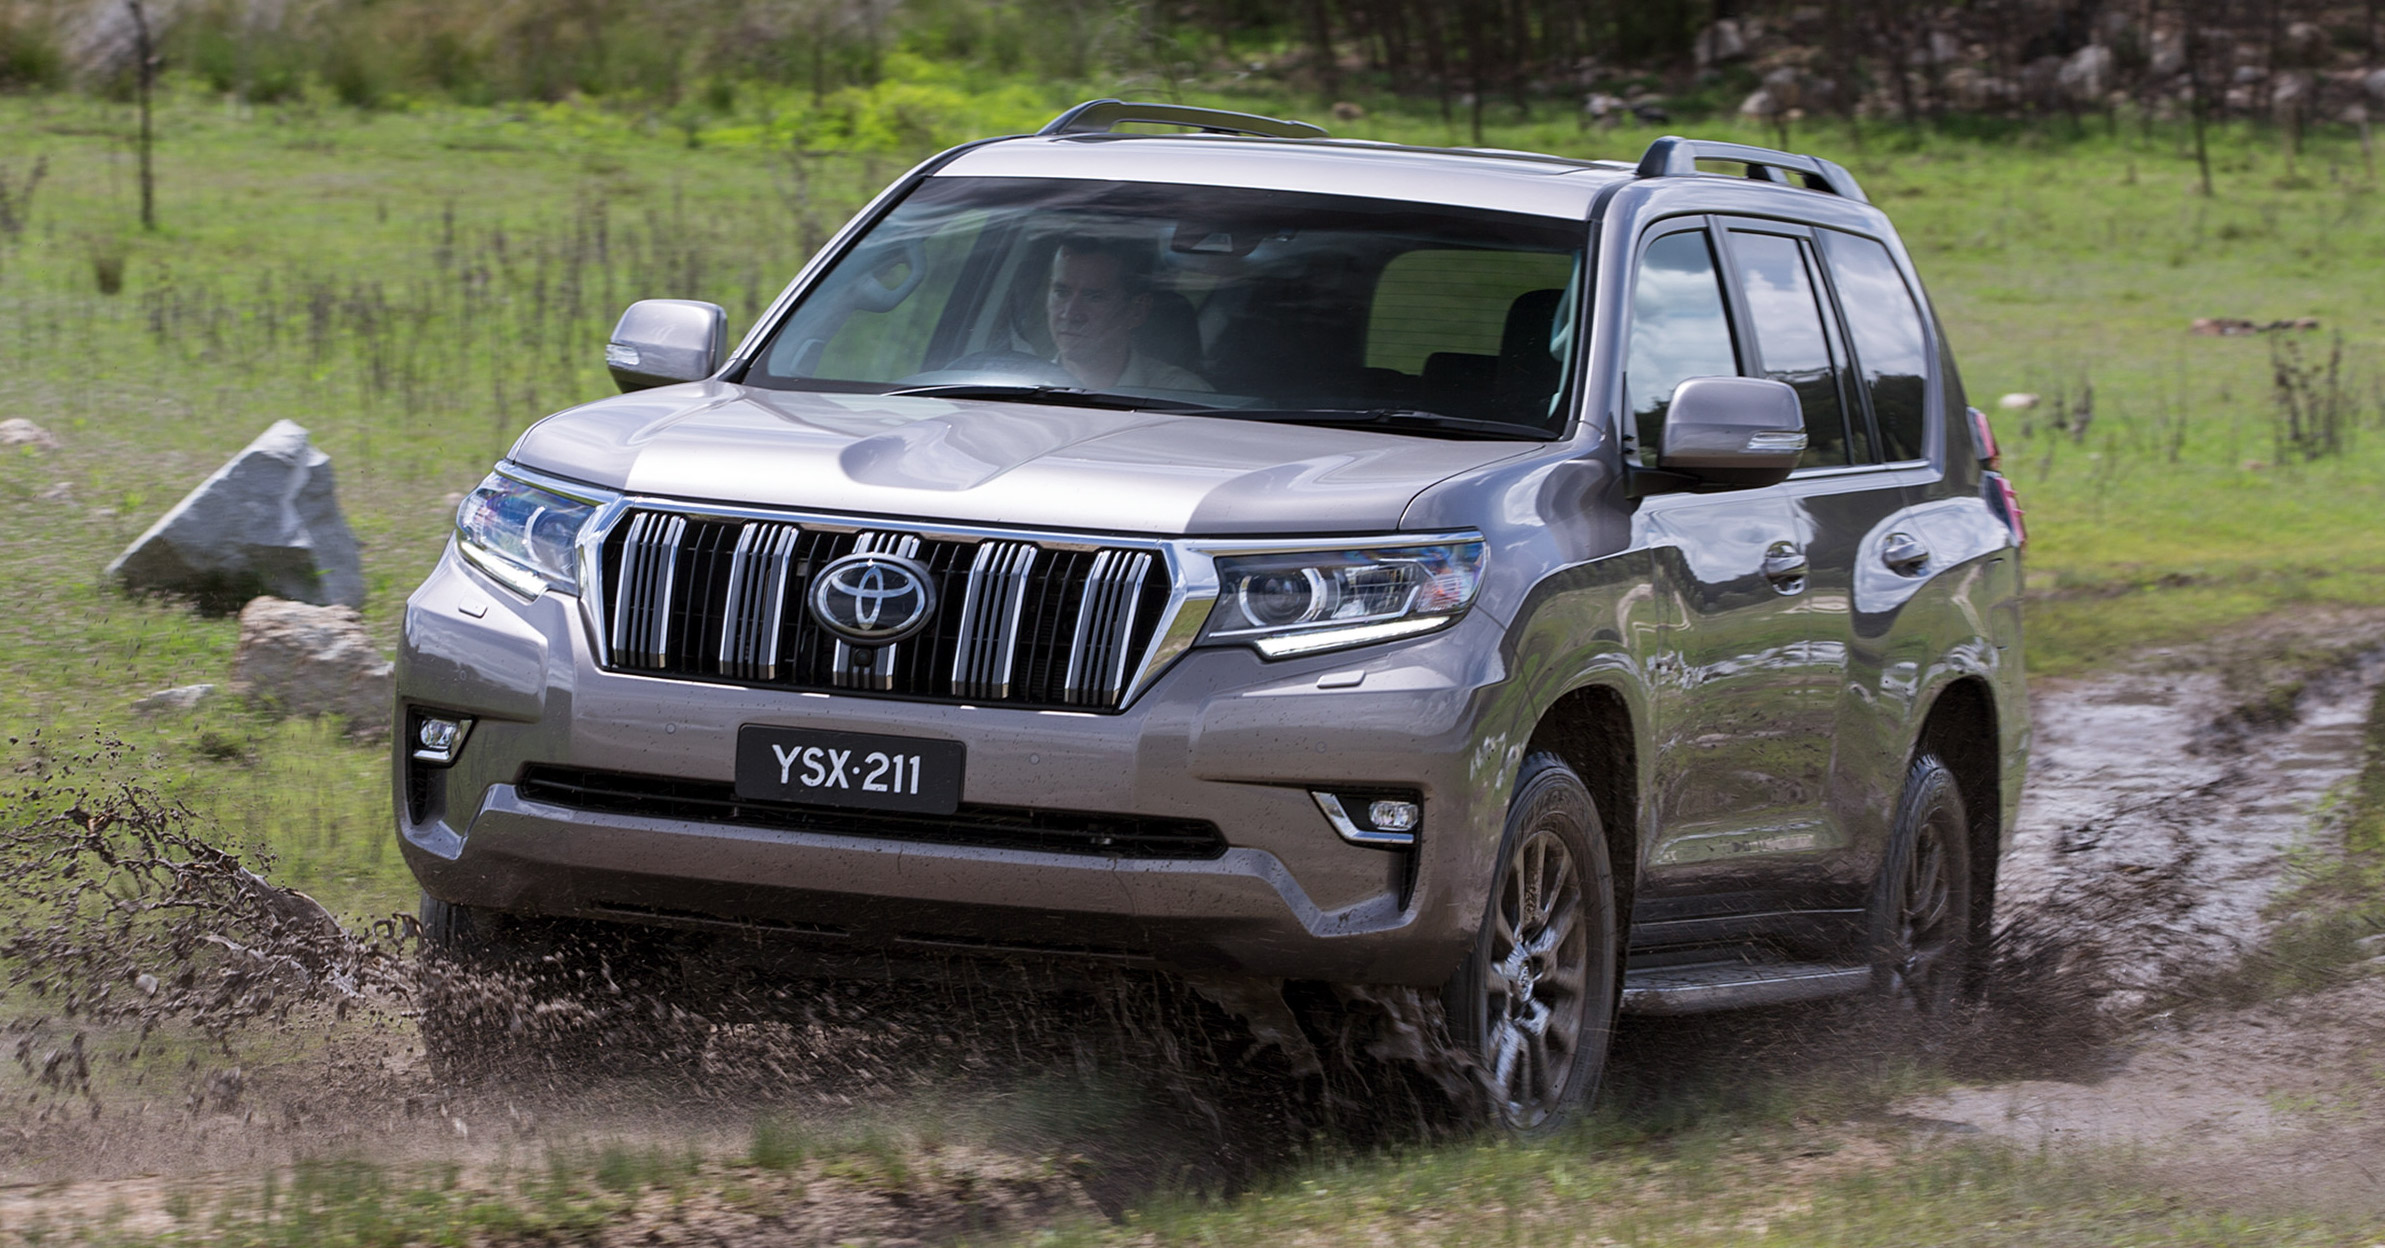 21 Toyota Land Cruiser Prado Updated In Australia 2 8l Turbodiesel Now With 4 Ps And 500 Nm New Kit Paultan Org